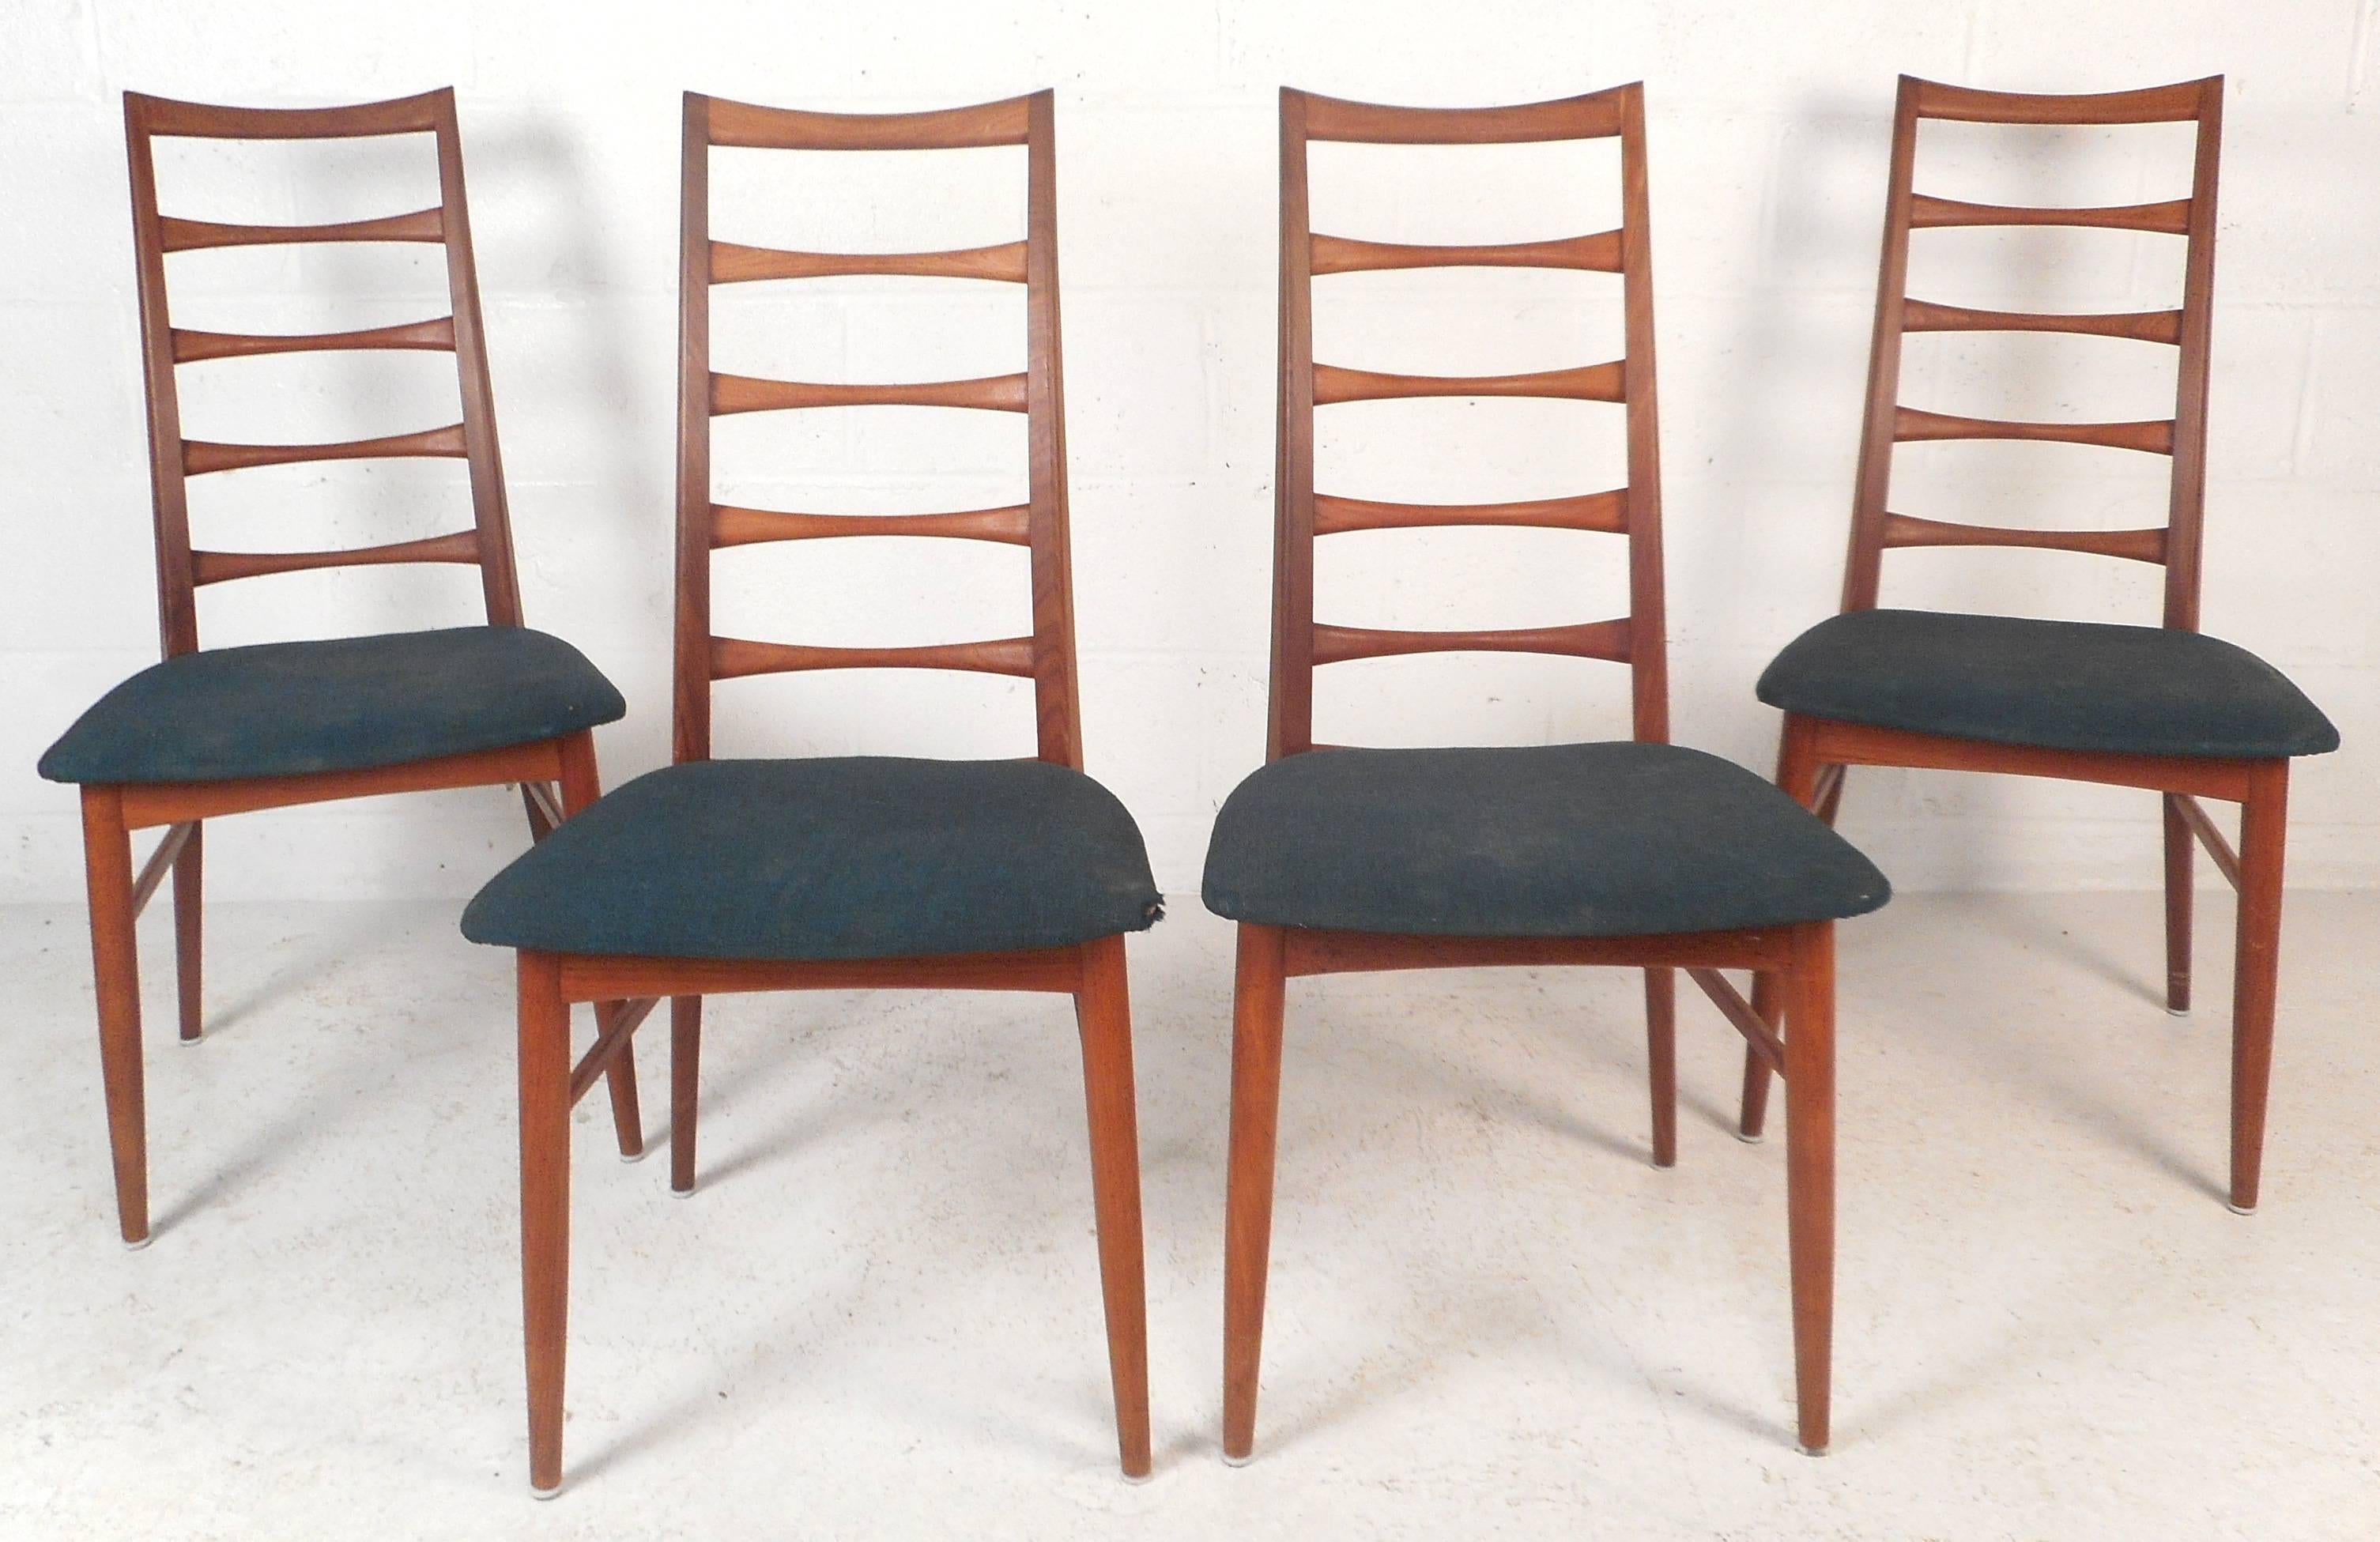 Stunning set of four vintage modern dining chairs feature unique ladder back rests and upholstered seats. Sleek design ensures comfort with angled back legs and a tall backrest. This unique set displays quality craftsmanship with beautiful teak wood